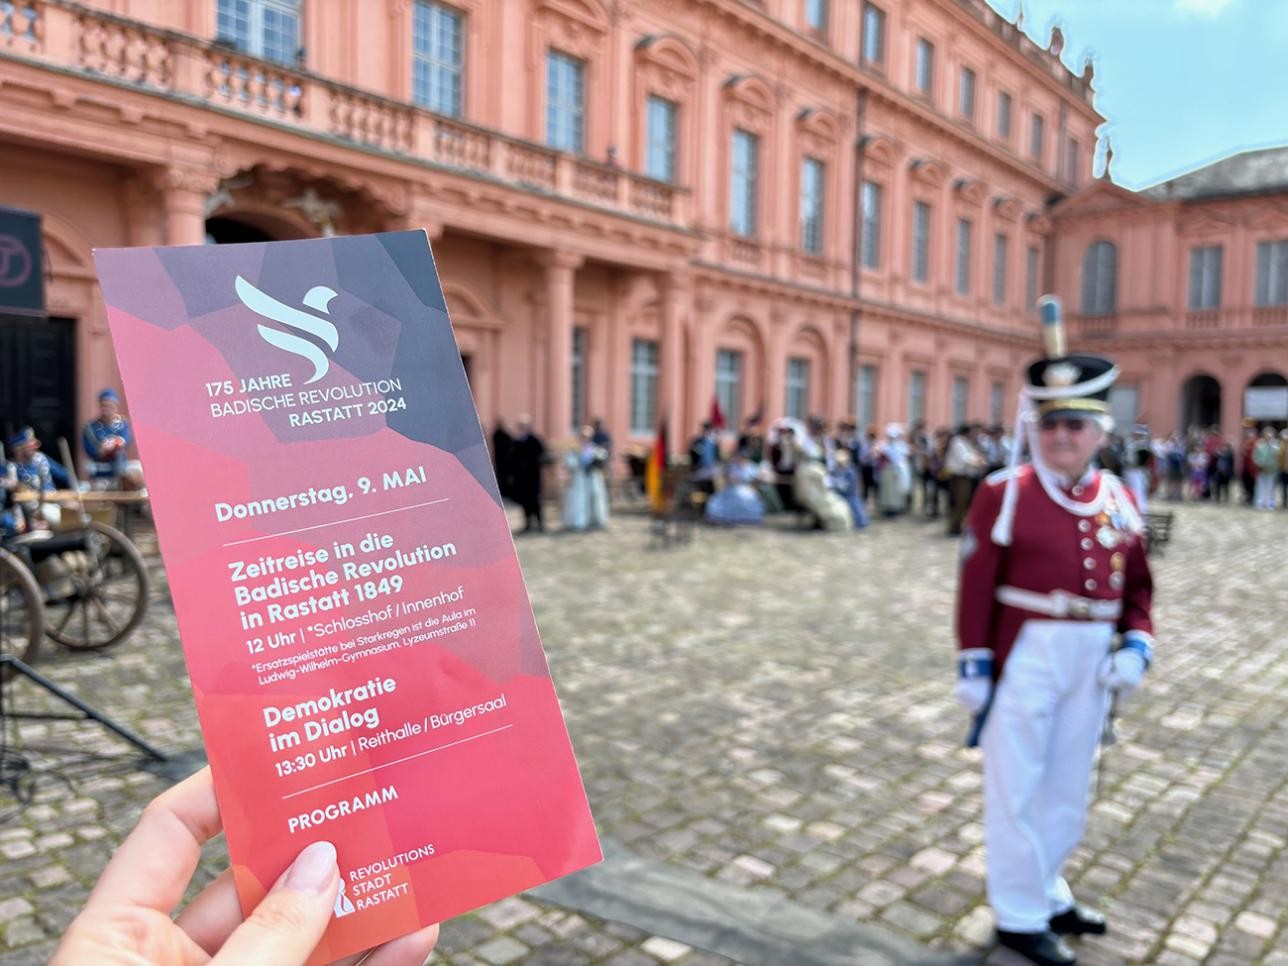 Woman holding the program for 9 May in the castle courtyard